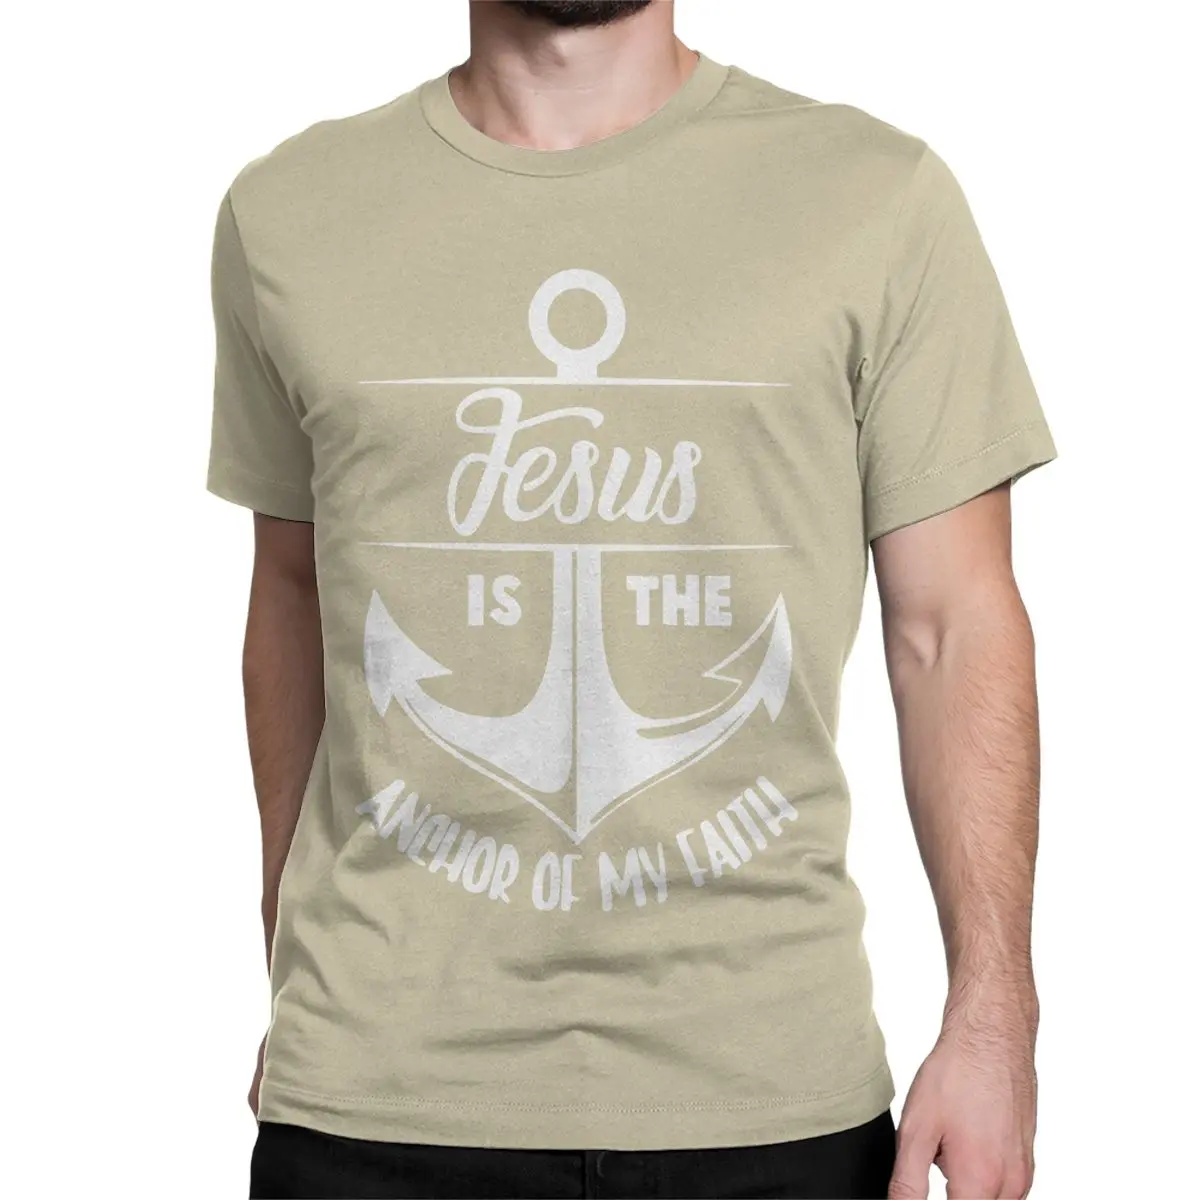 Jesus Is The Anchor Of My Faith Christian Design for Men Women T Shirt  Funny Tee Shirt T-Shirts 100% Cotton Graphic Clothing - AliExpress